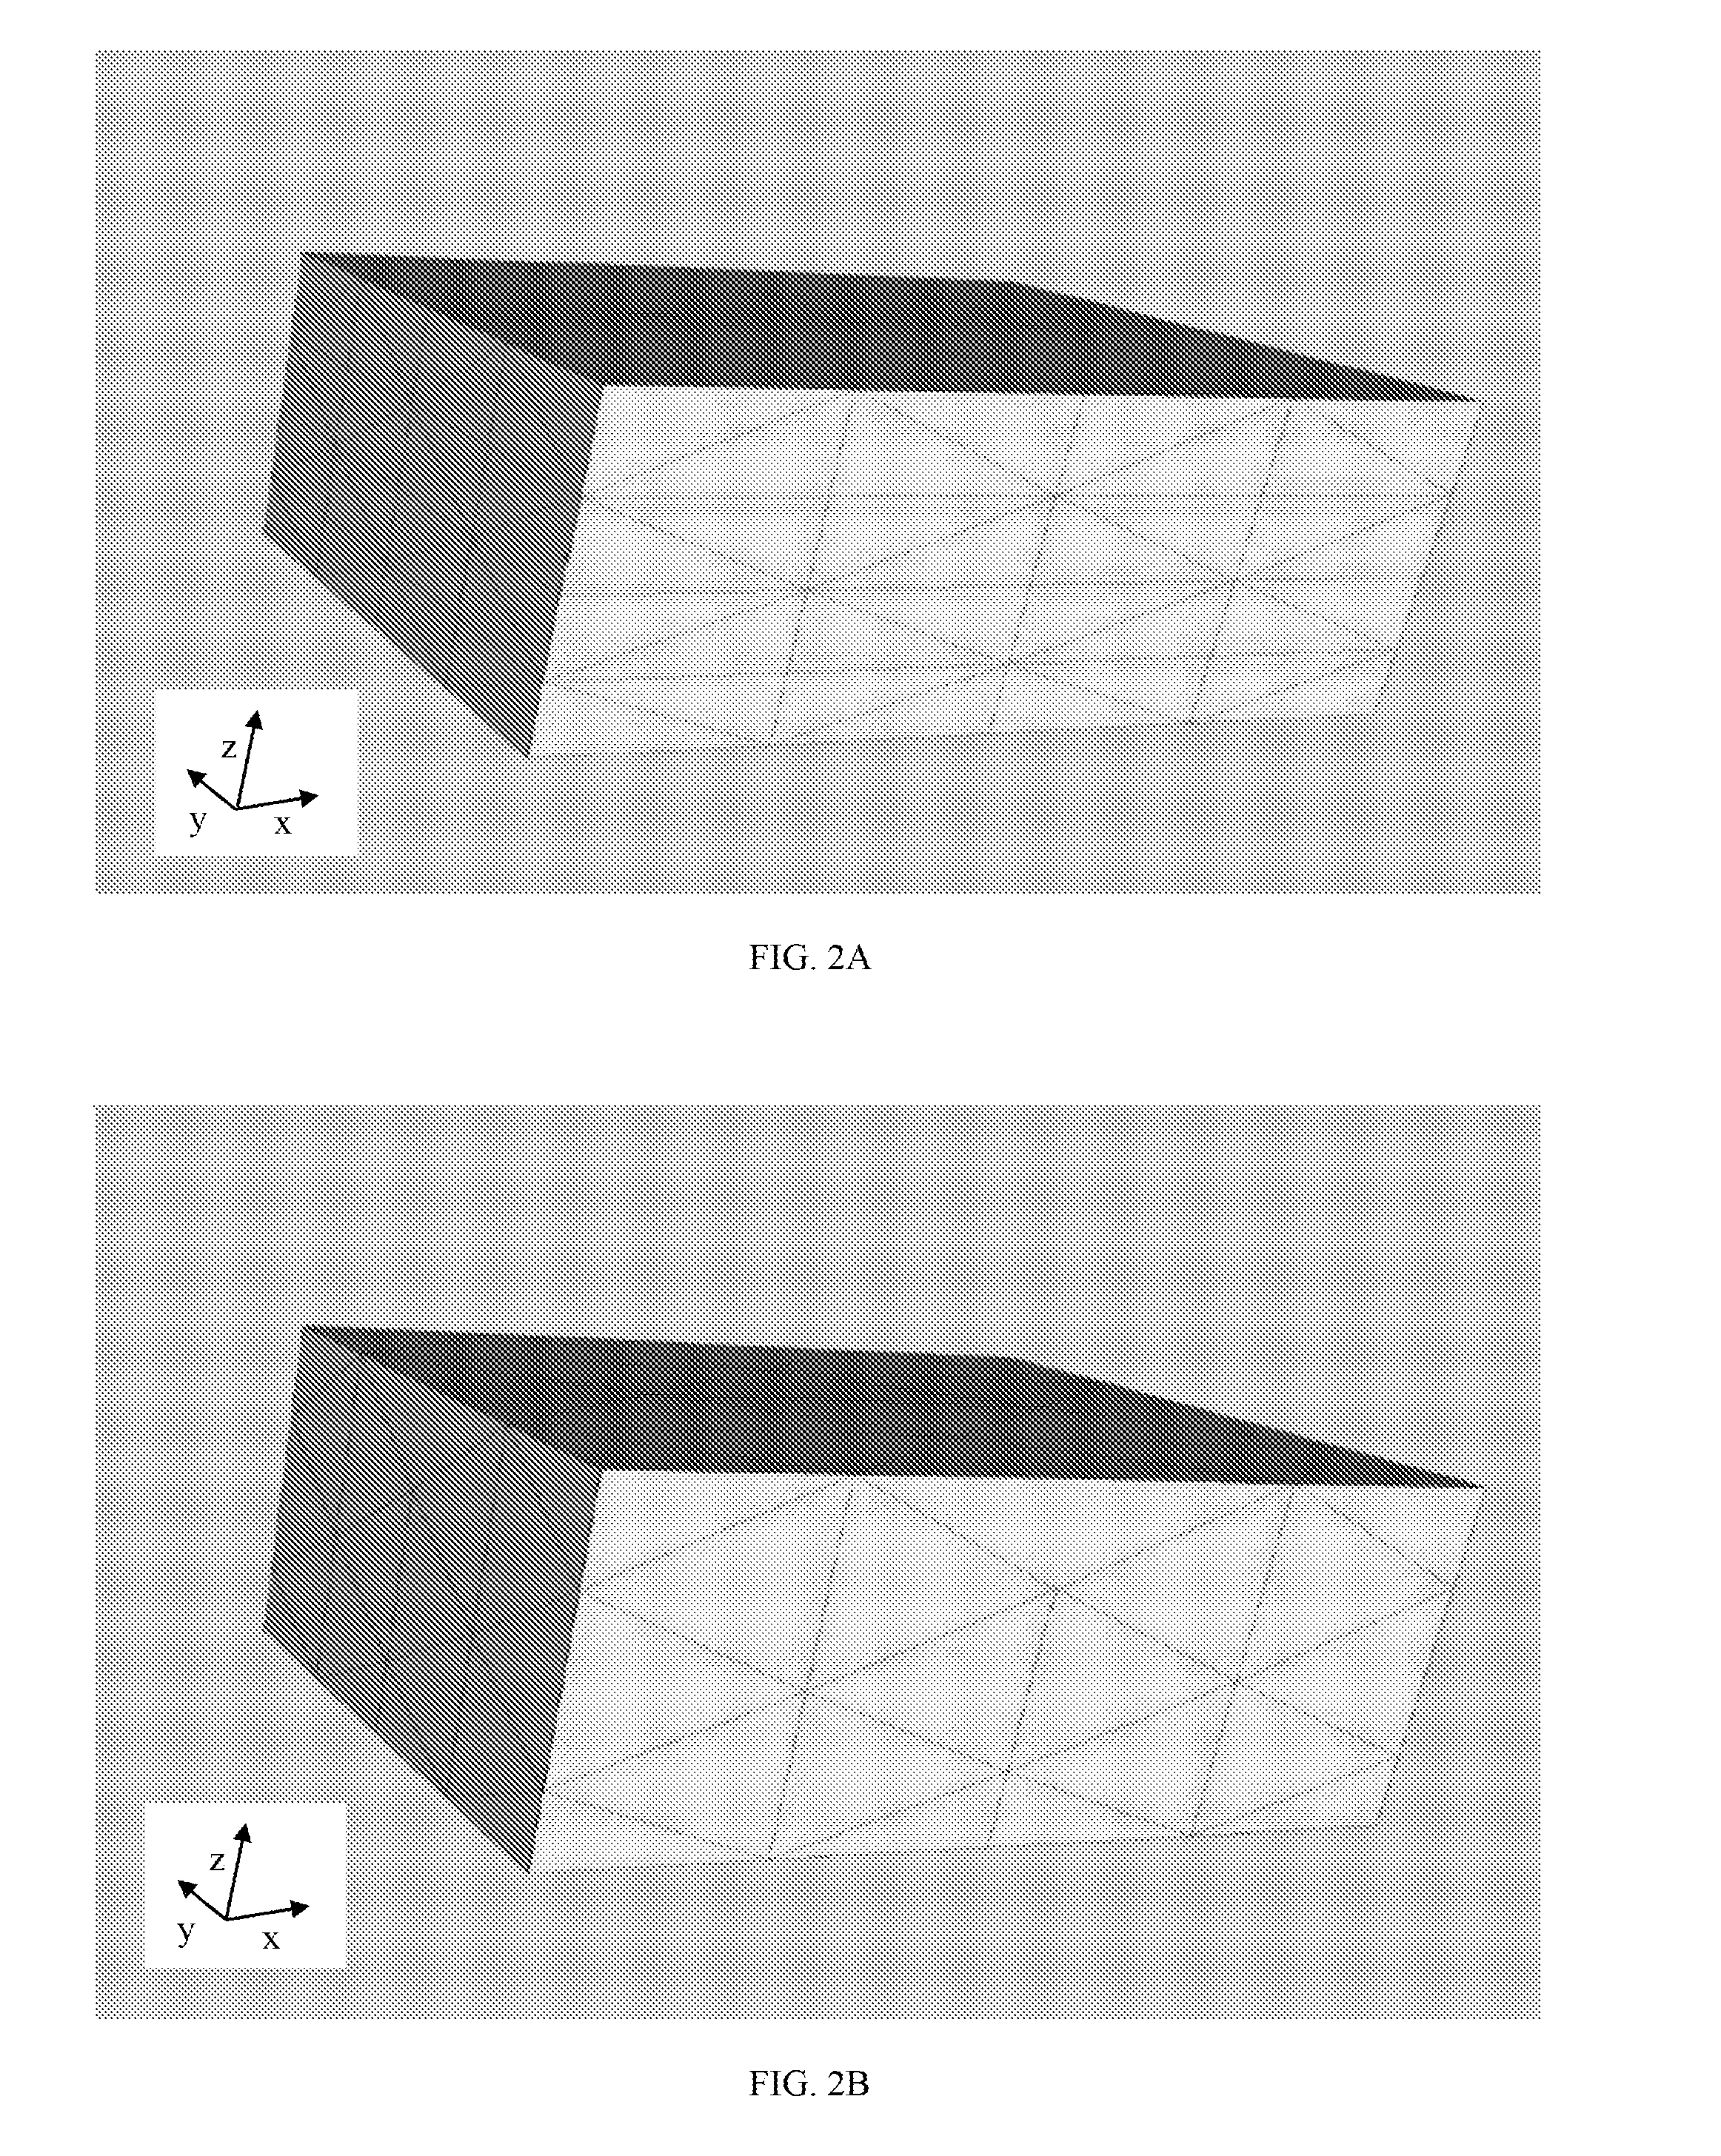 Method of constructing an optimized mesh for reservoir simulation in a  subterranean formation